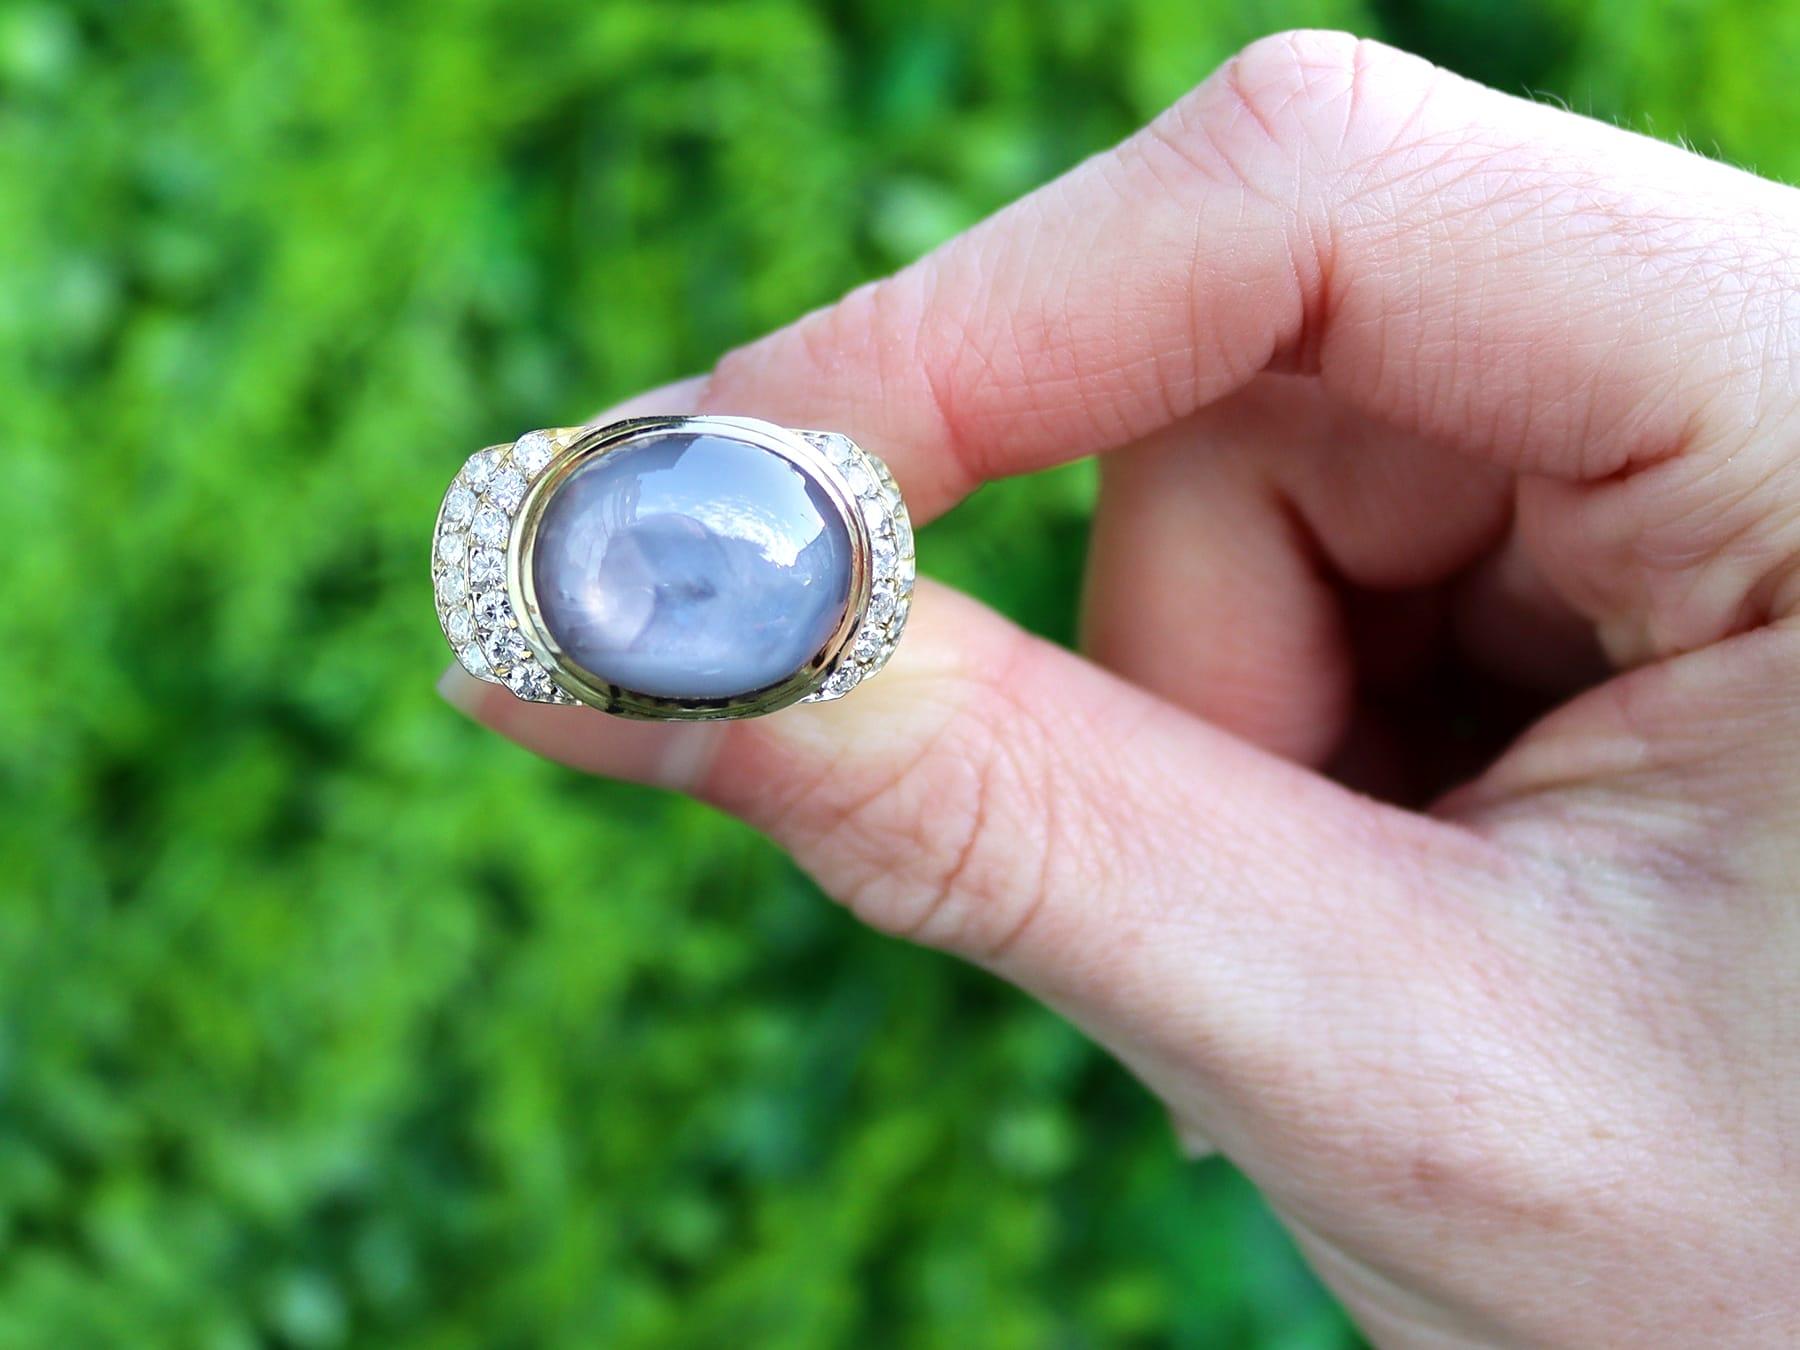 A stunning antique 1980's 17.50 carat star sapphire and 0.98 carat diamond, 18 karat yellow gold dress ring; part of our diverse antique jewelry and estate jewelry collections

This stunning, fine and impressive vintage sapphire and diamond ring has